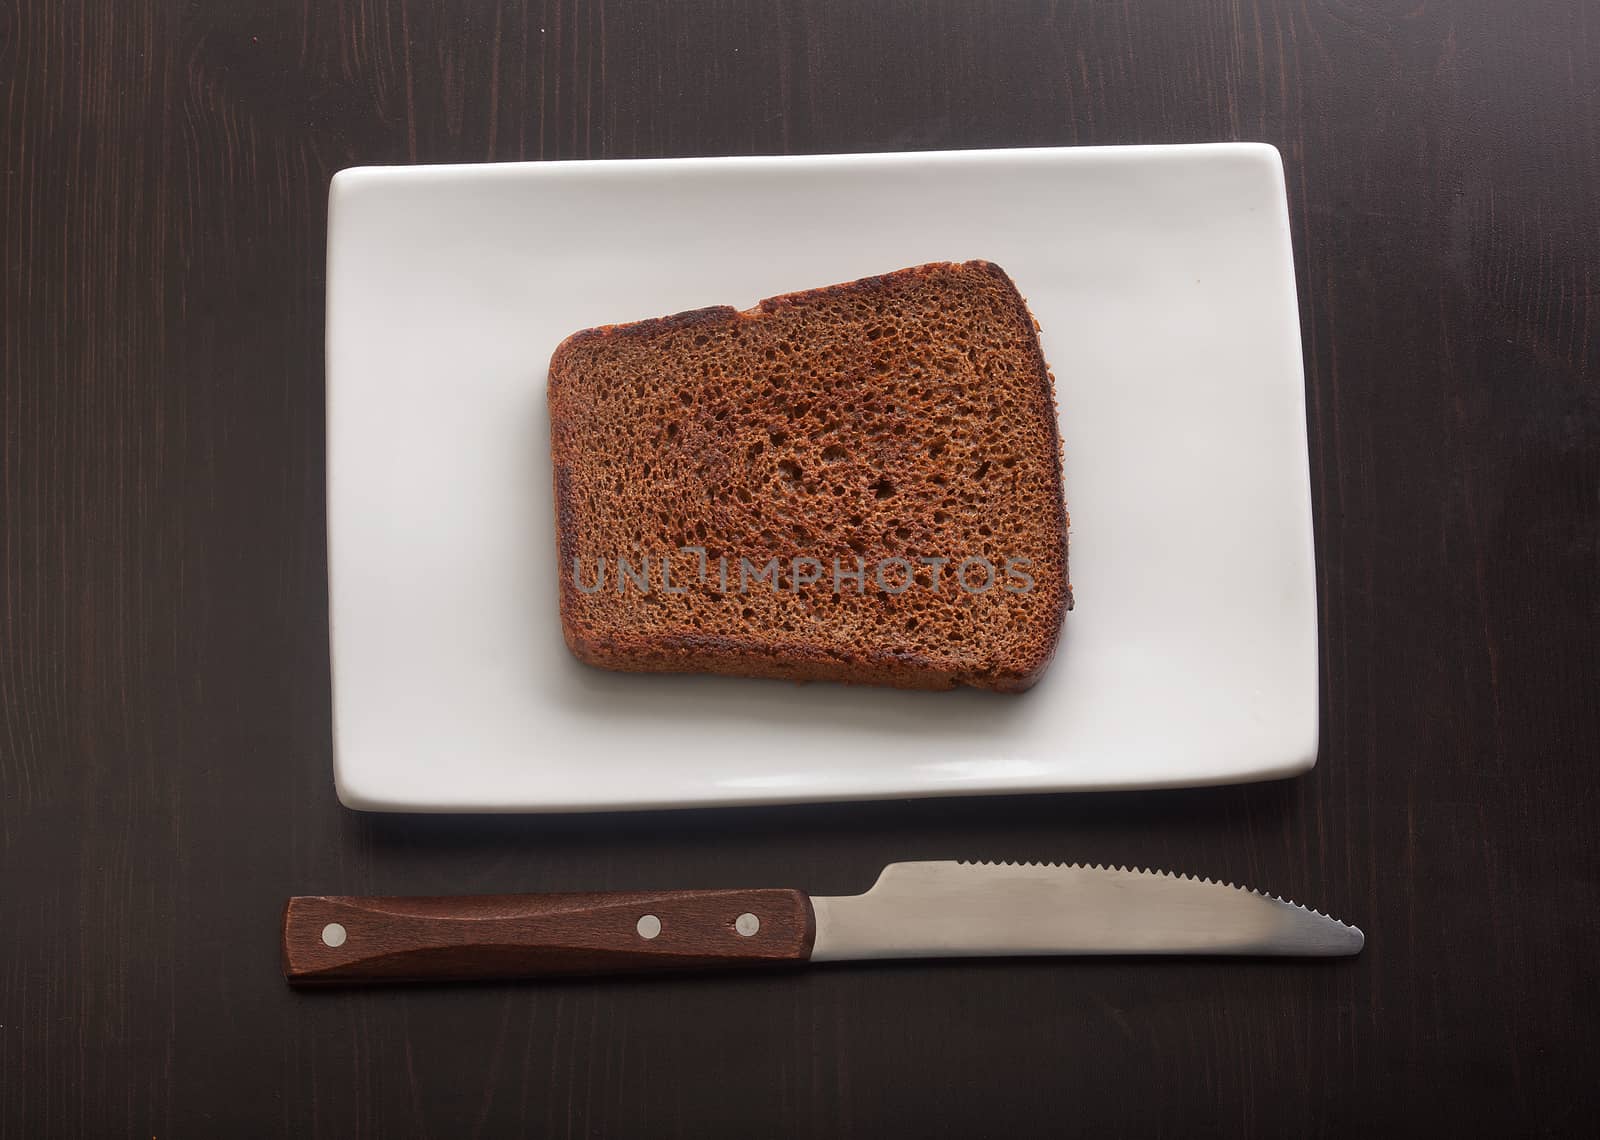 Toasted rye bread on the white plate by Angorius